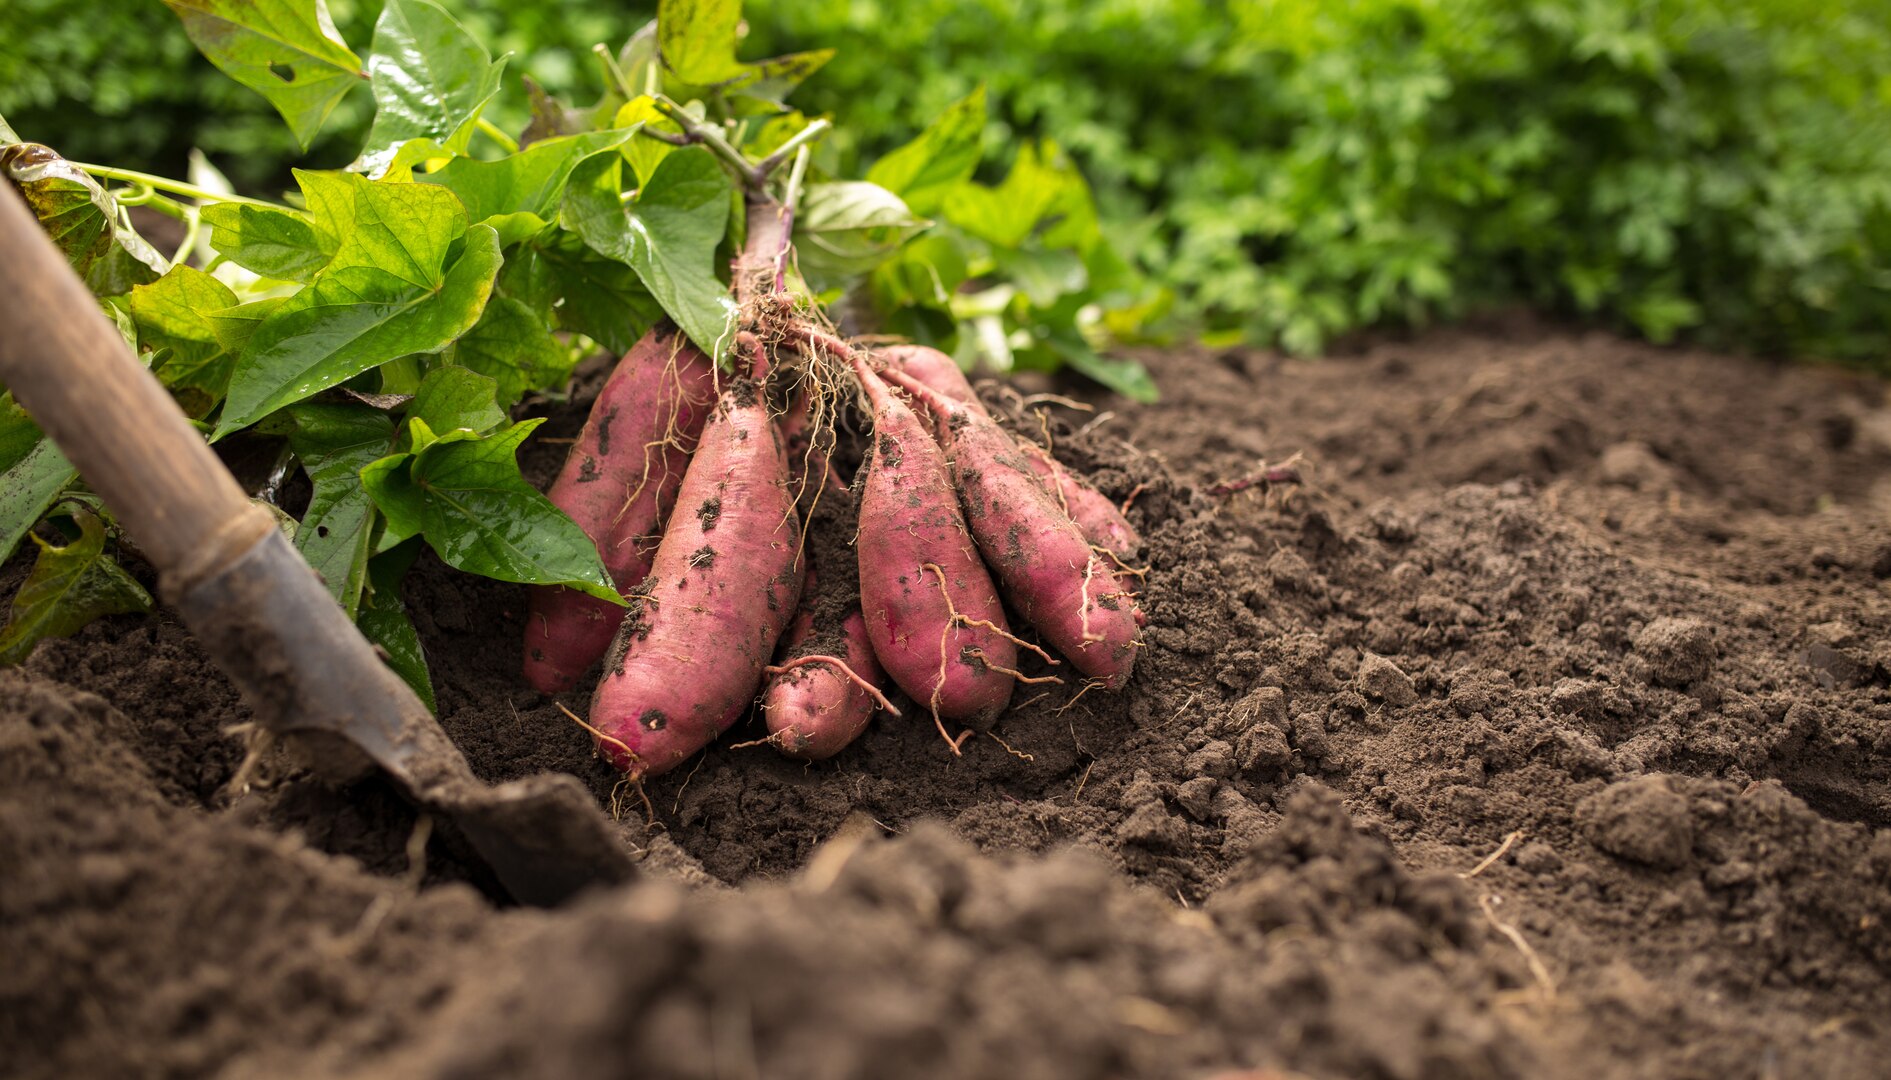 A bunch of sweet potato lay in rich brown soil next to a shovel with green plants in the background of the image.